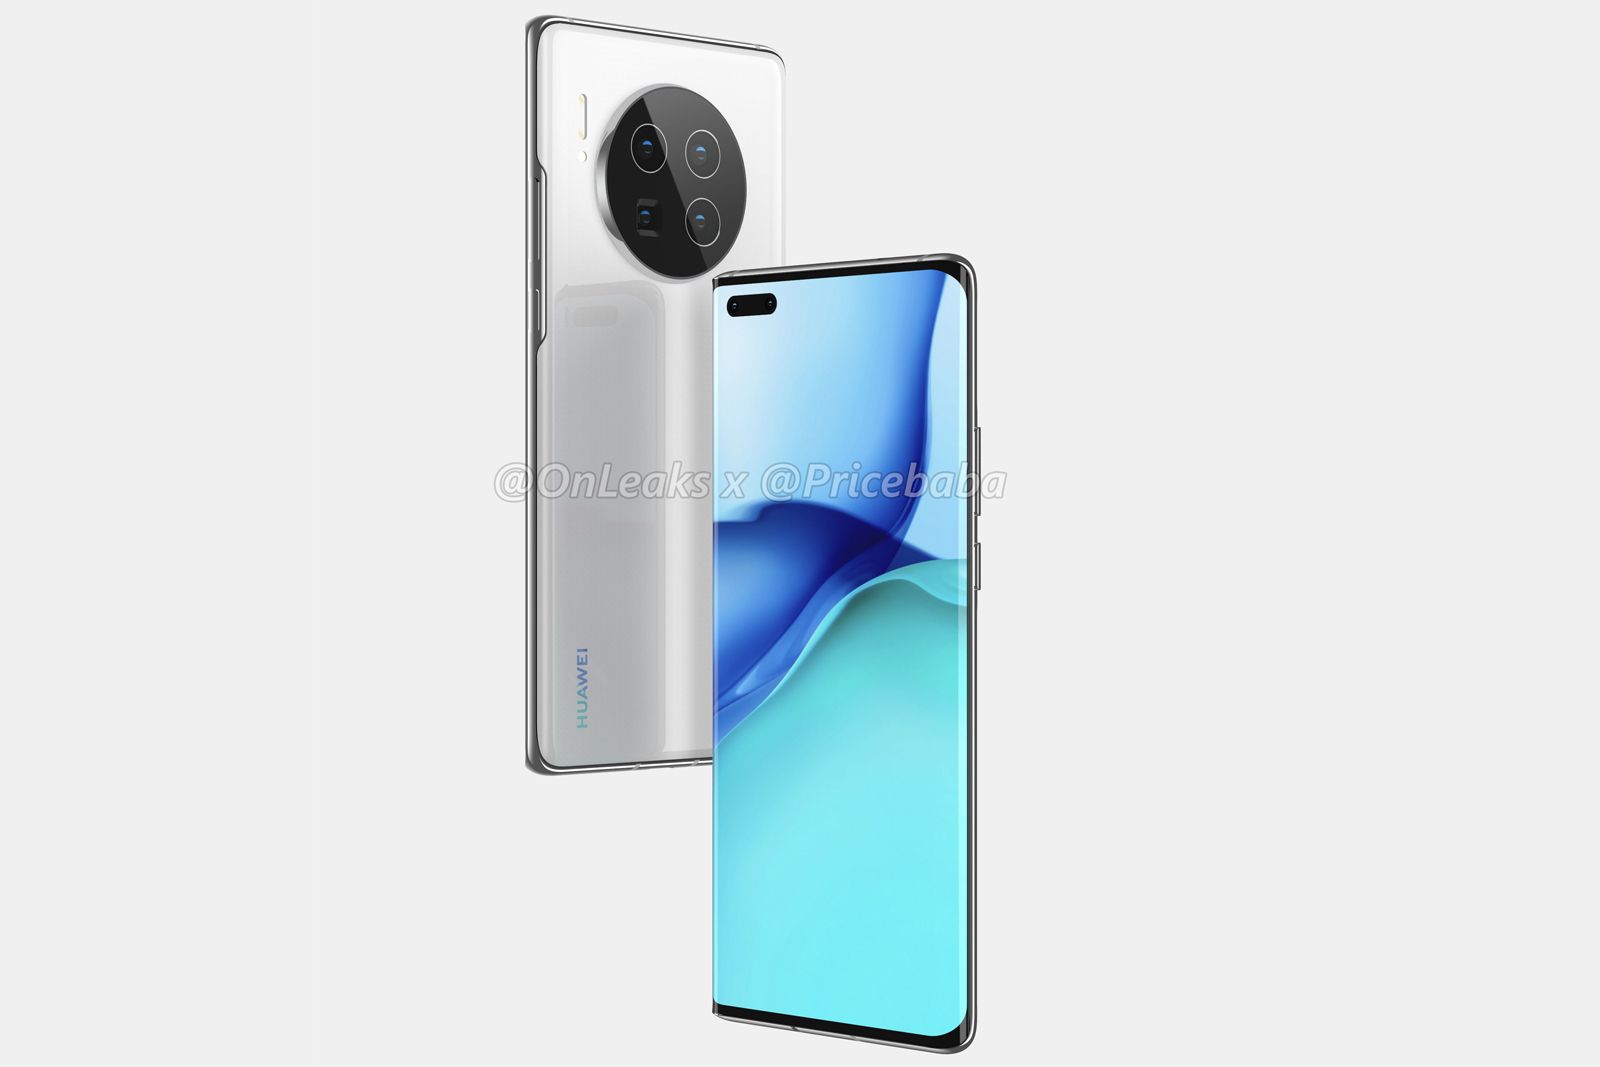 Here's what the Huawei Mate 40 and Mate 40 Pro could look like photo 1